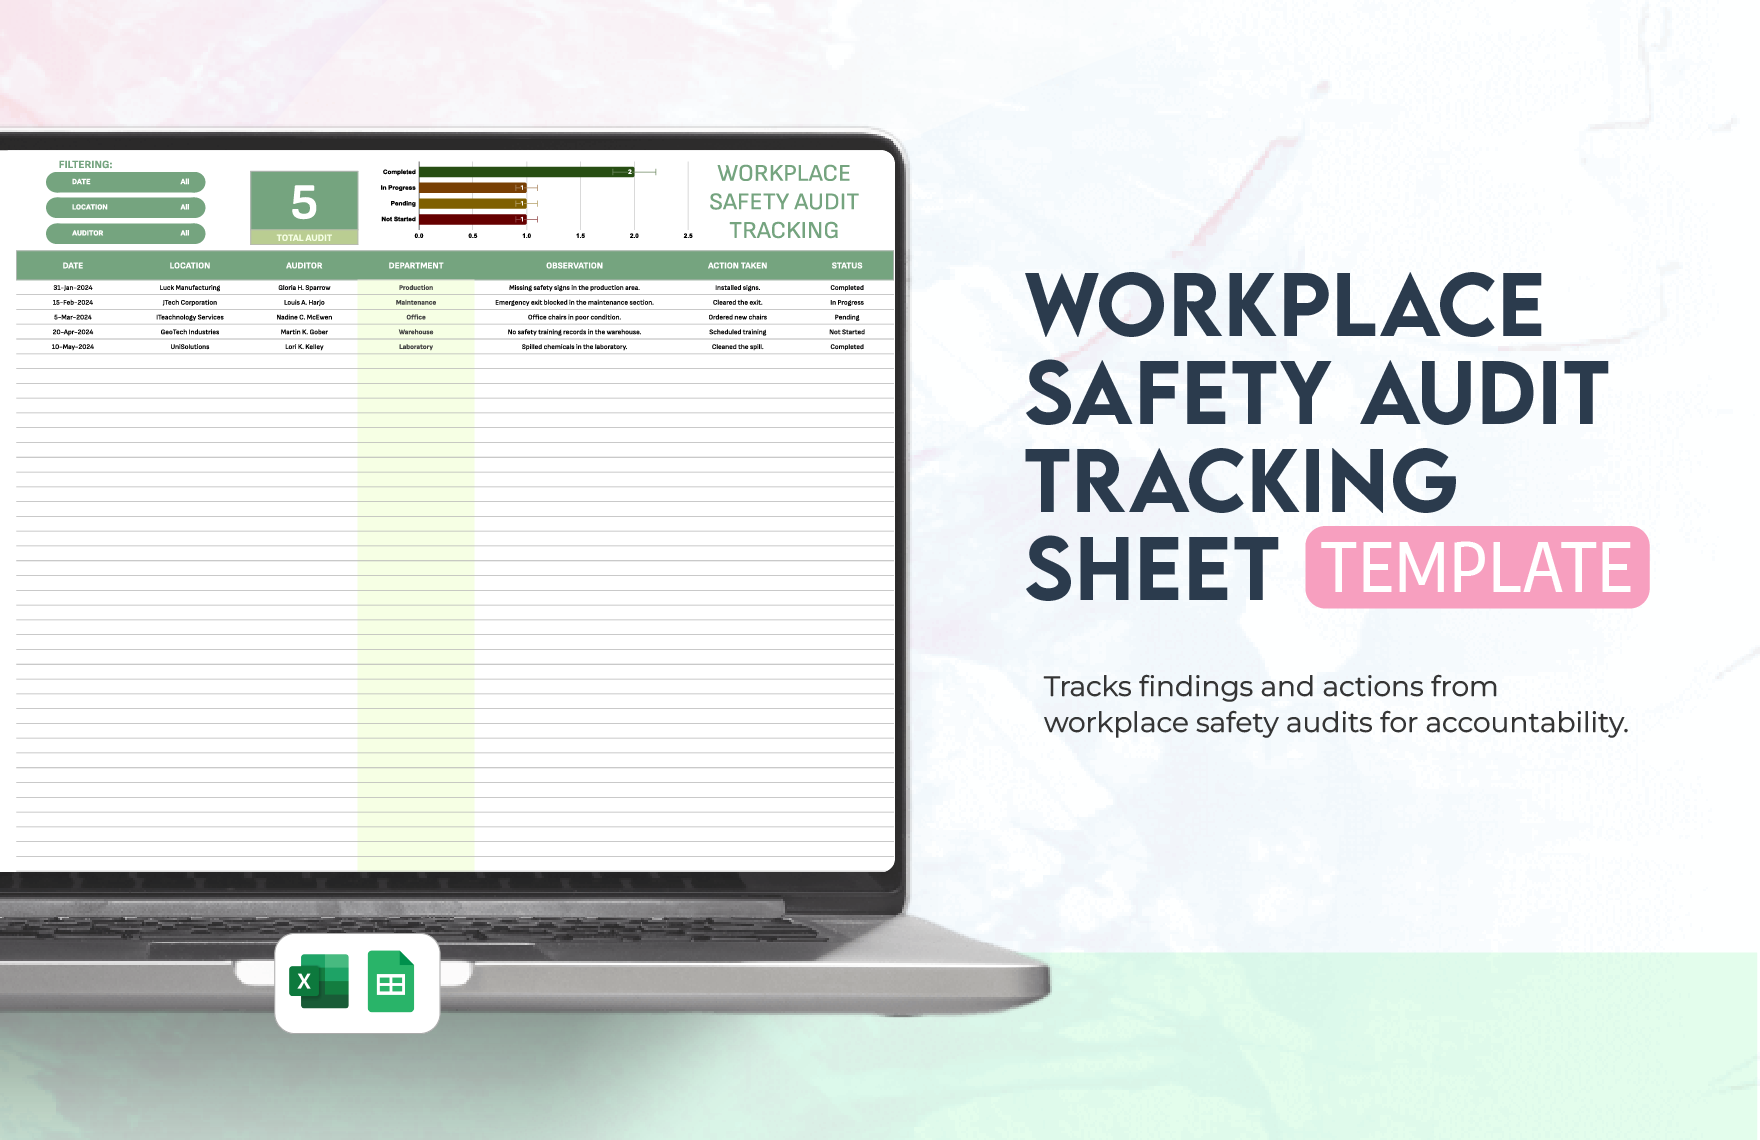 Workplace Safety Audit Tracking Sheet Template in Excel, Google Sheets